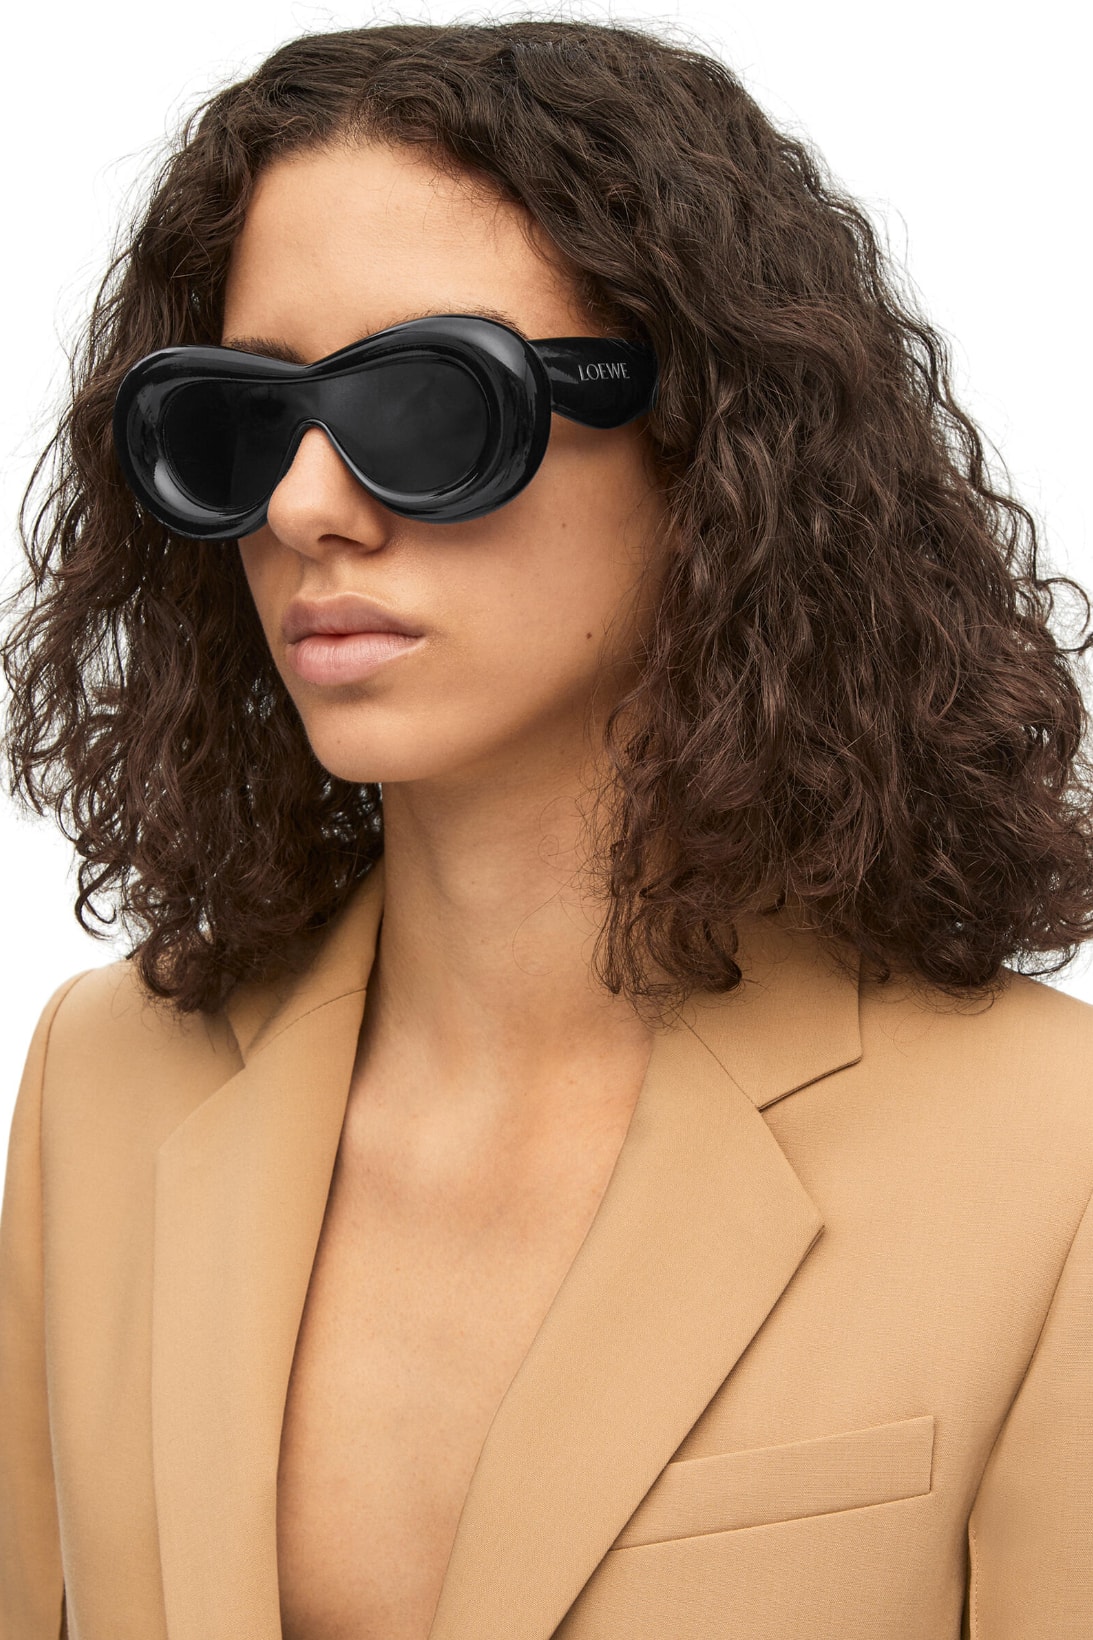 The streets have spoken: Loewe's cat-eye sunglasses are the must-have of  the moment